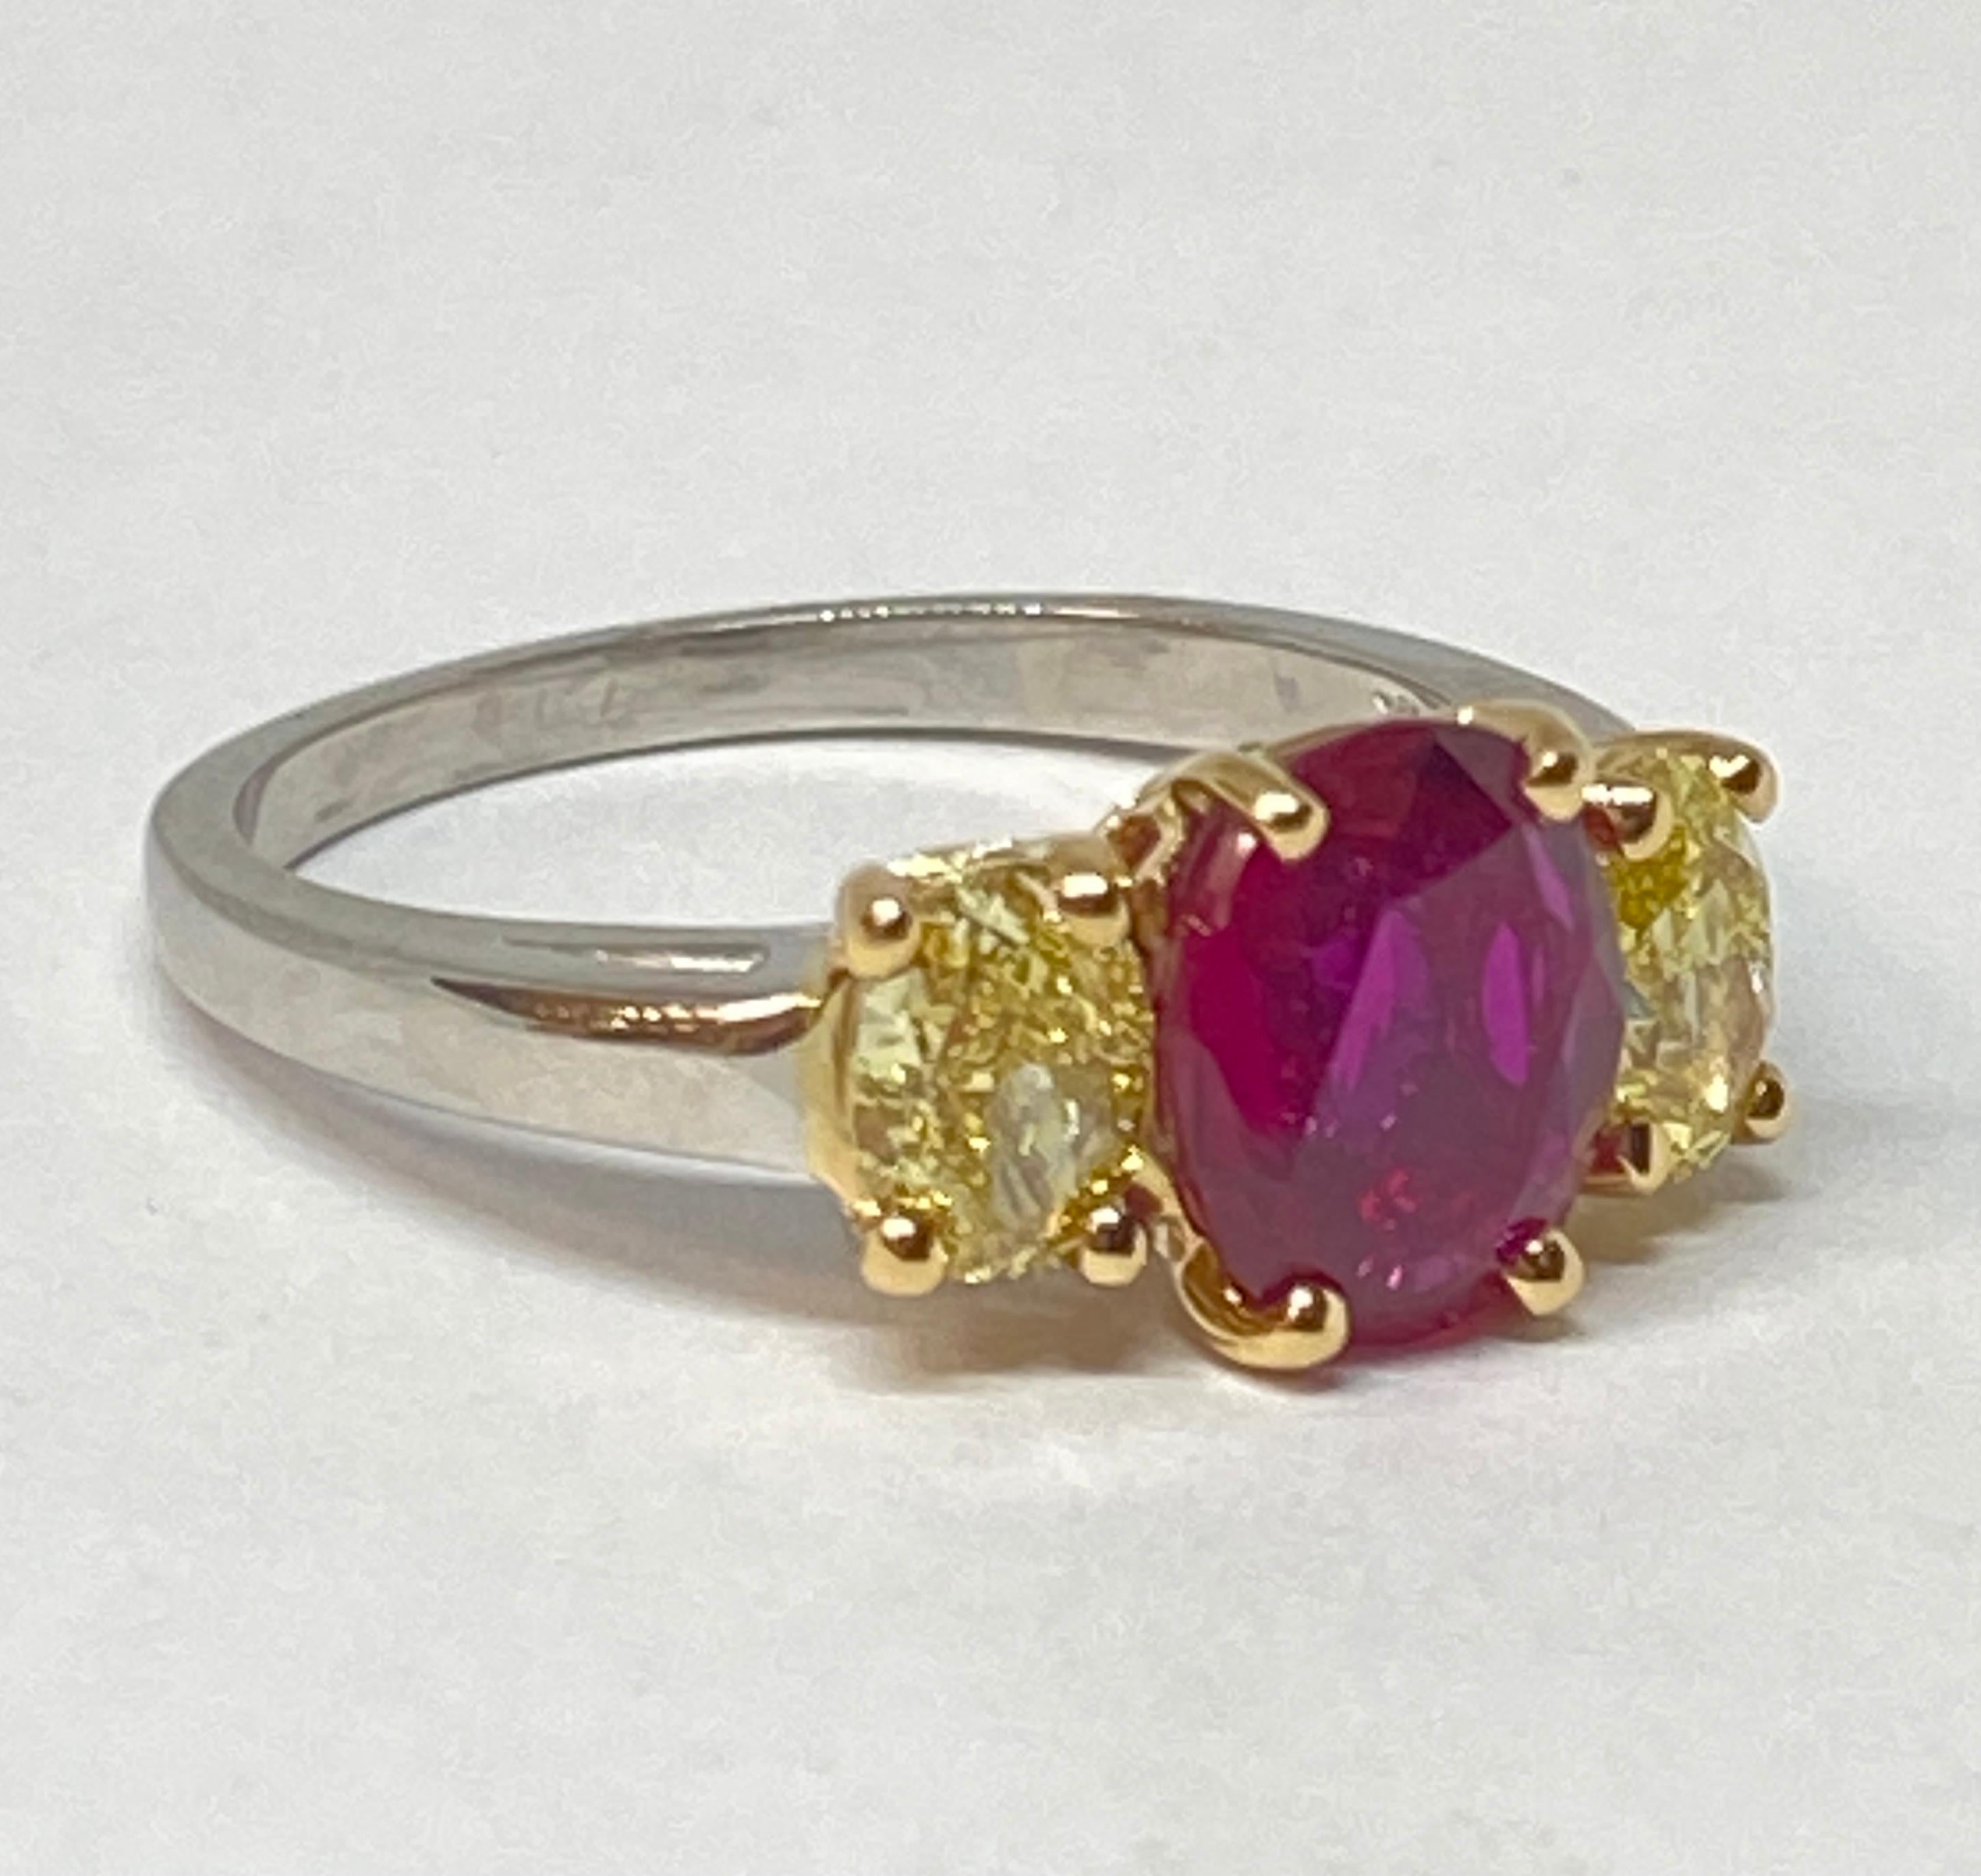 This stunning ruby and diamond three-stone ring designed by Oscar Heyman features a 2.07-carat Burma no-heat oval ruby flanked by two natural yellow oval-shaped diamonds. This ruby is of fine quality and exceptional color.

2.07-carat natural